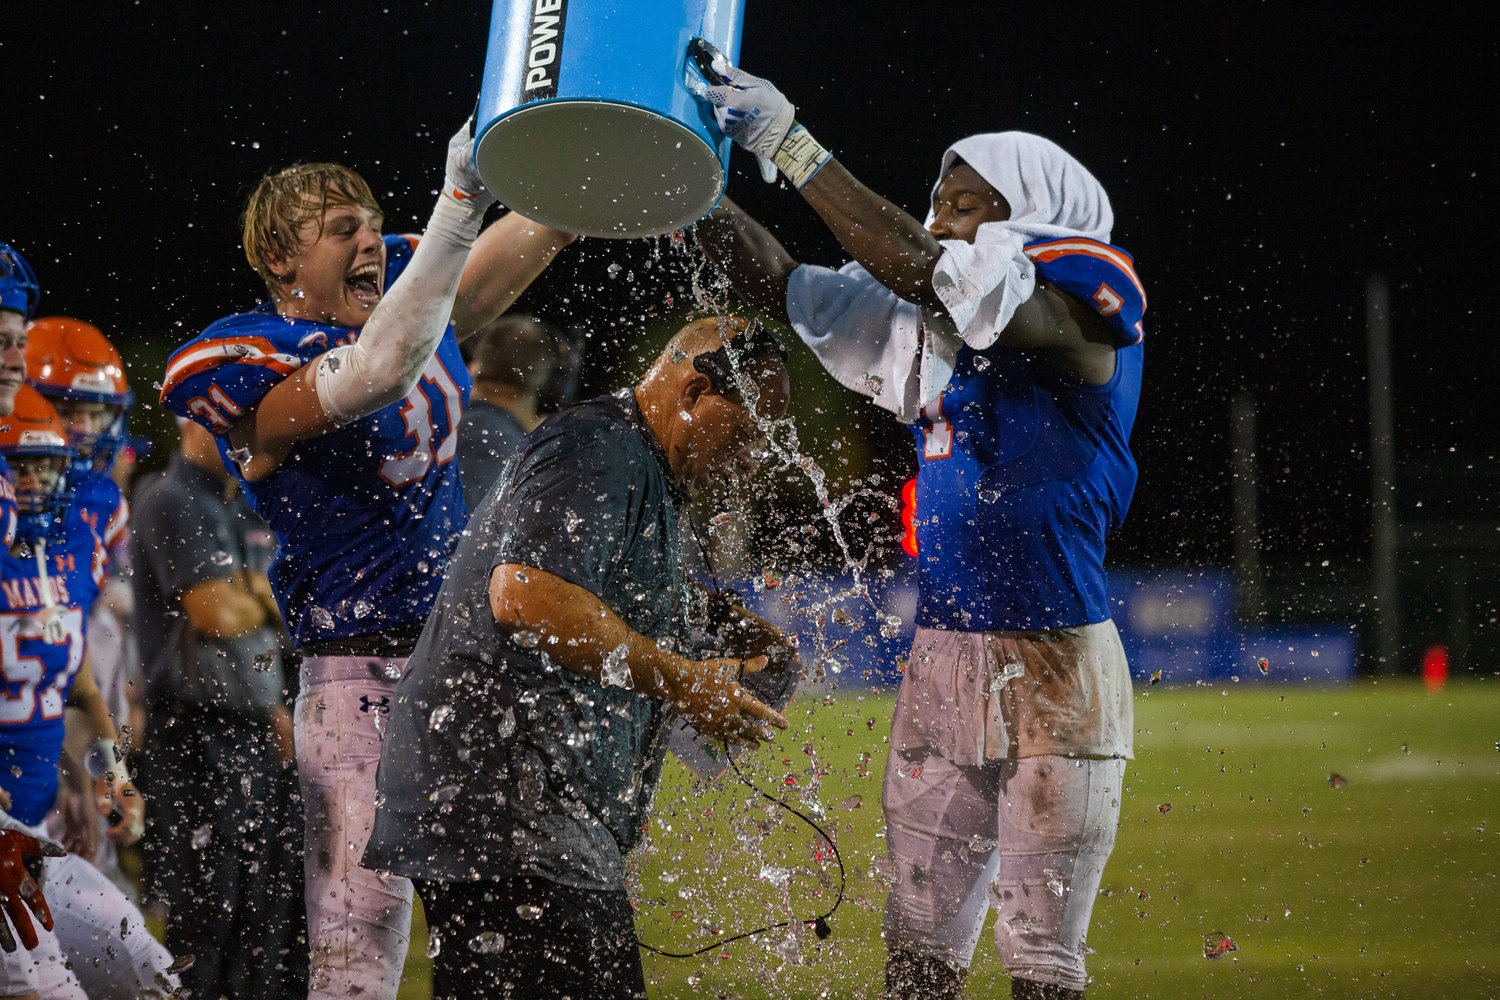 Orange Beach's Chandler Wilson (31) and Chris Pearson (7) shower Mako head coach Jamey DuBose in celebration of the team's first win in Class 4A Region 1 over Jackson 31-14 Friday night at the Sportsplex.